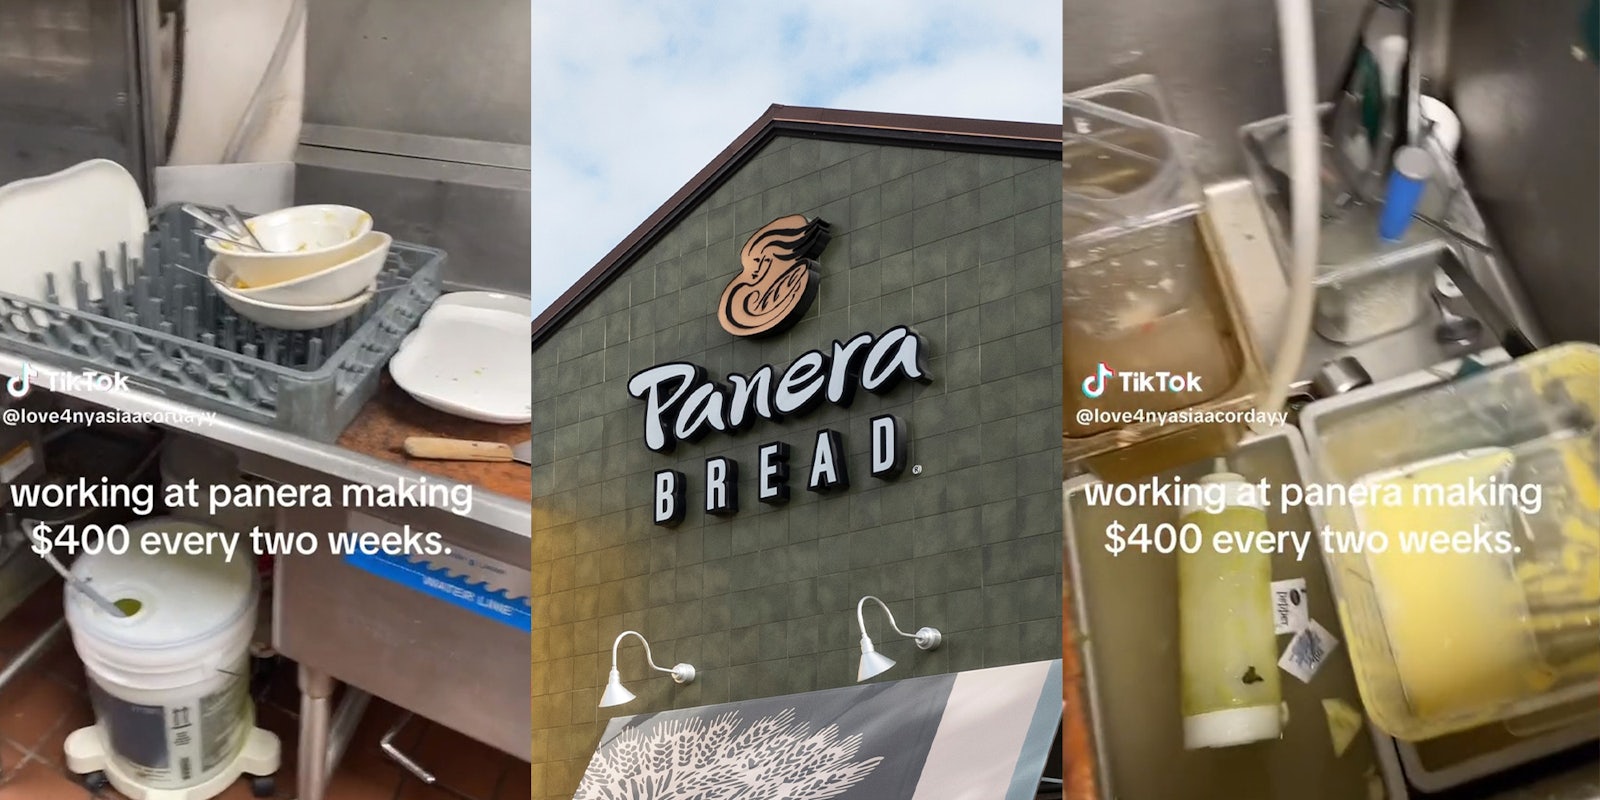 Worker shows what it's like working at Panera for $400 every 2 weeks